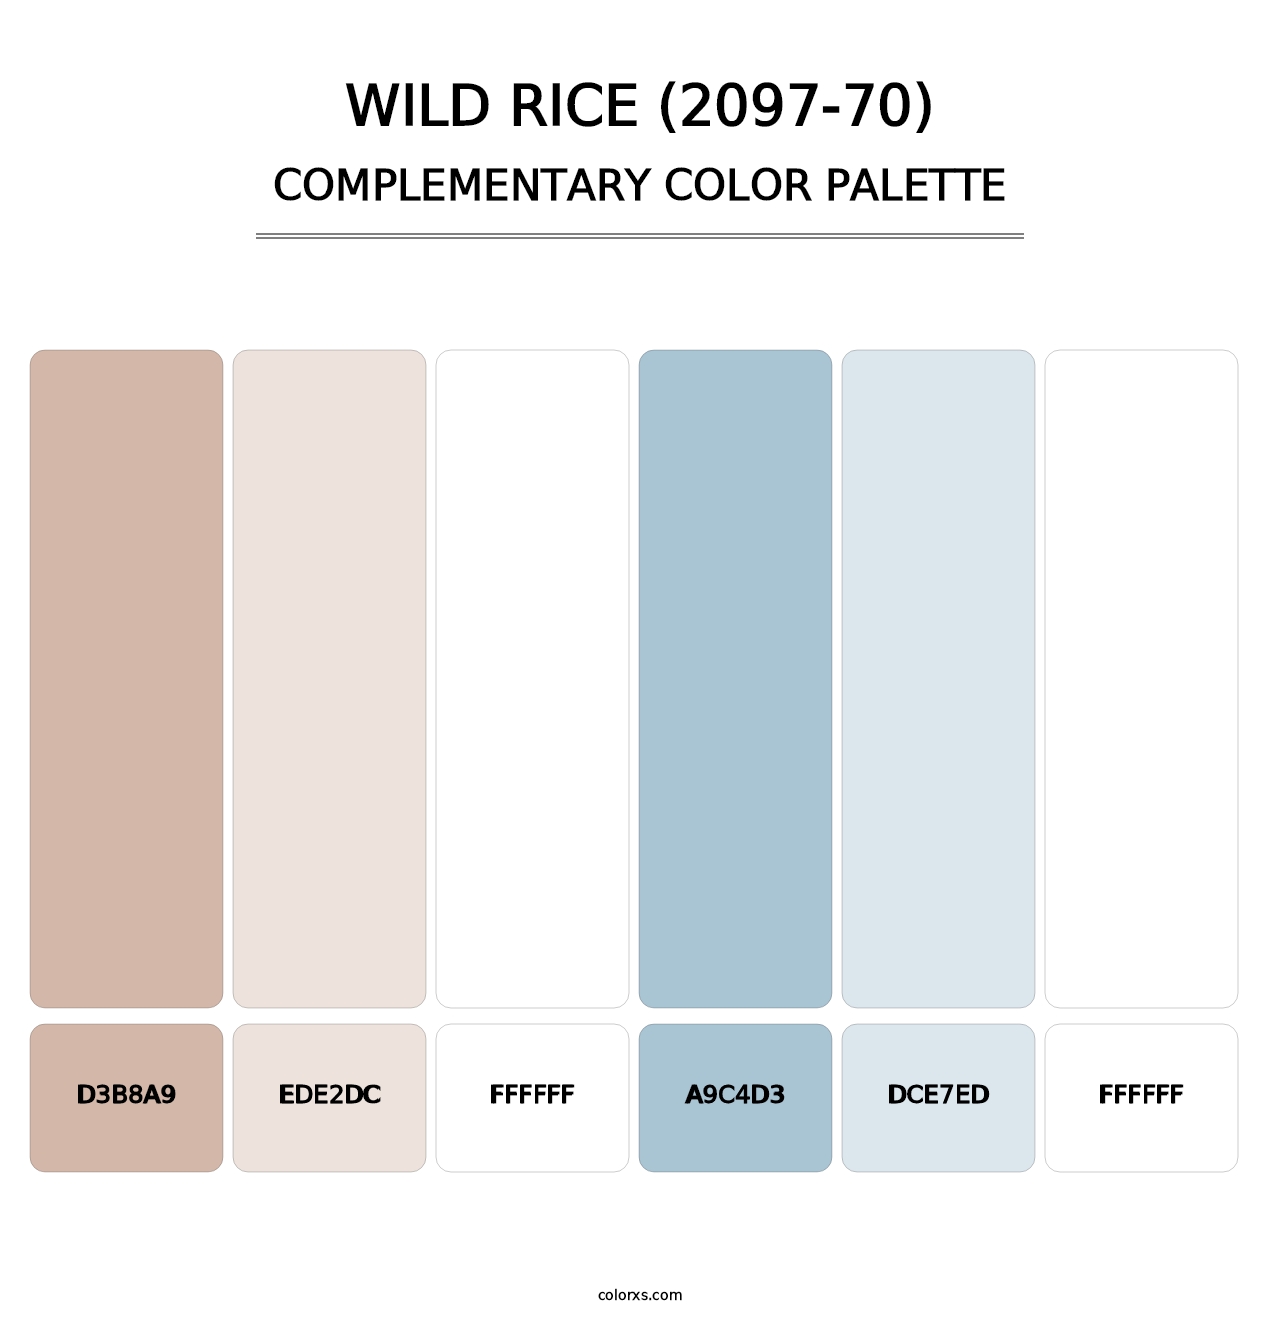 Wild Rice (2097-70) - Complementary Color Palette